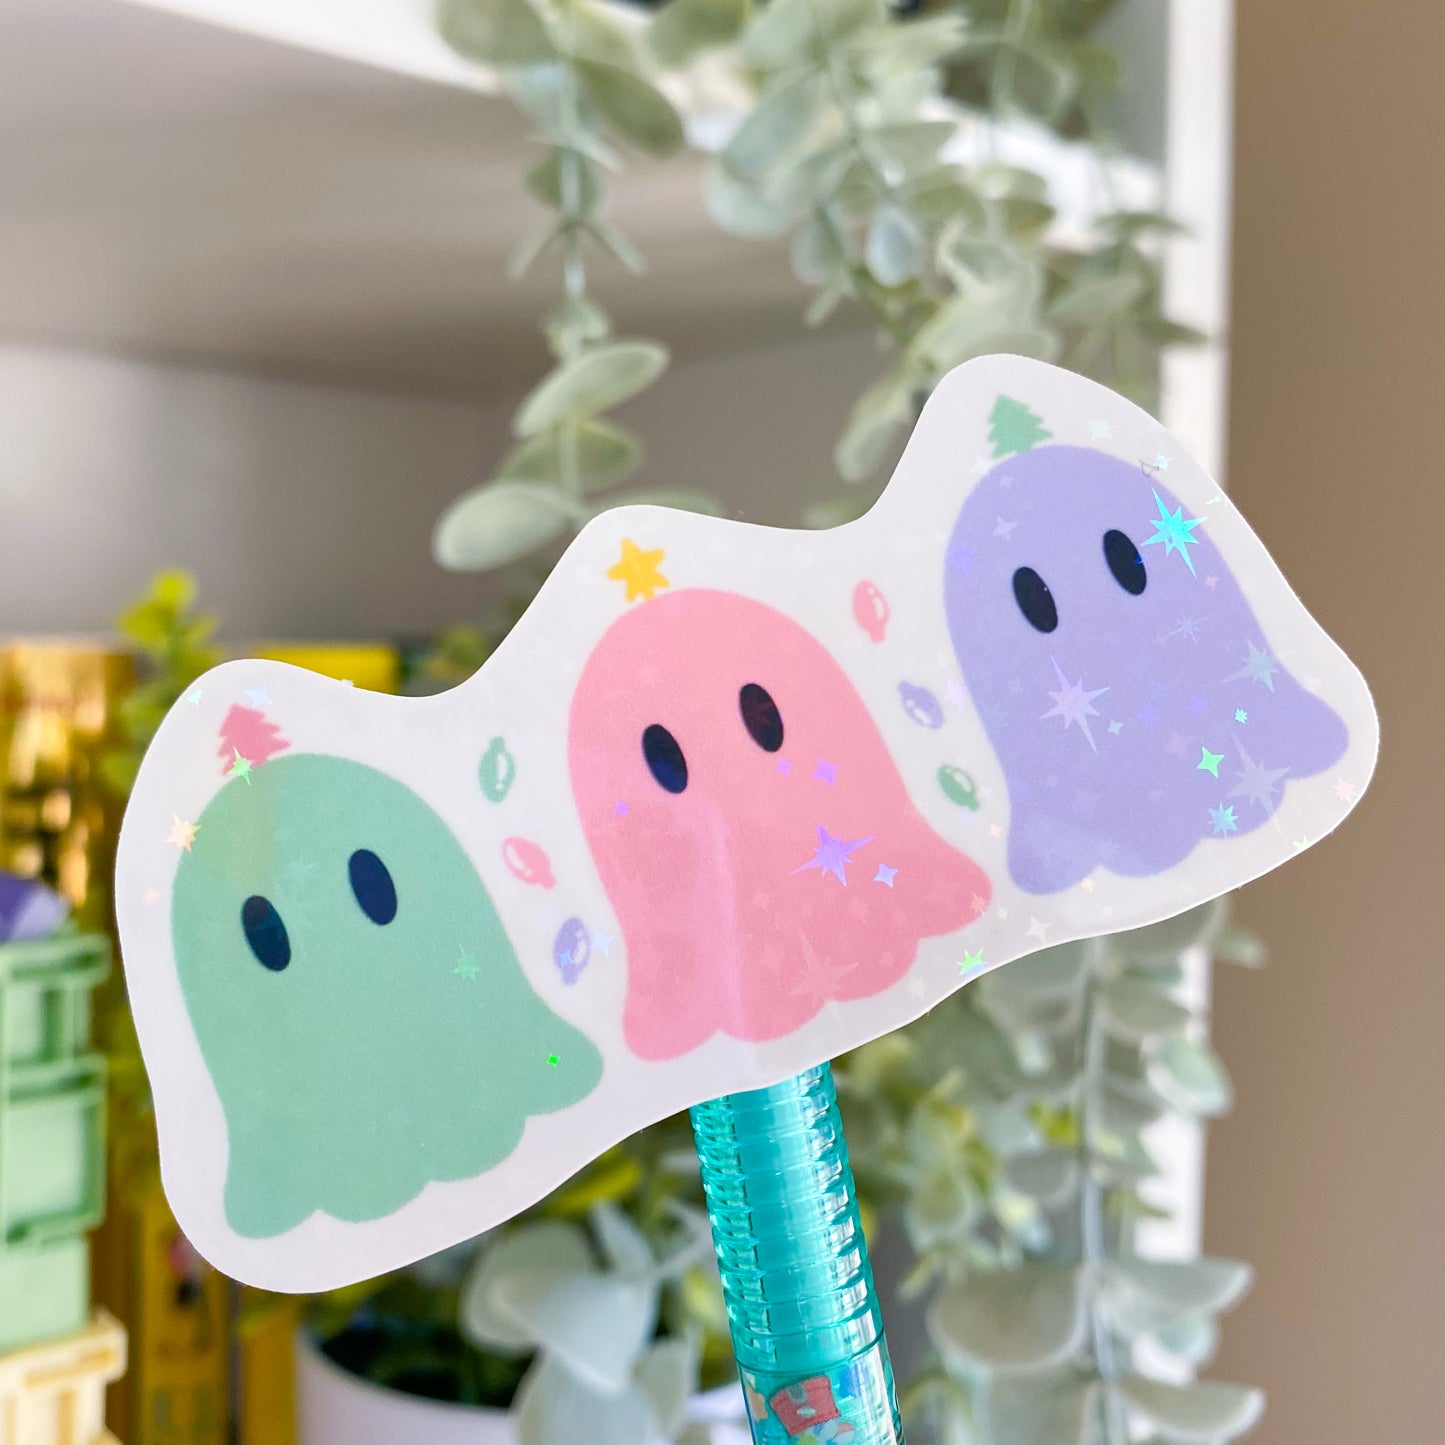 festive holographic ghosts